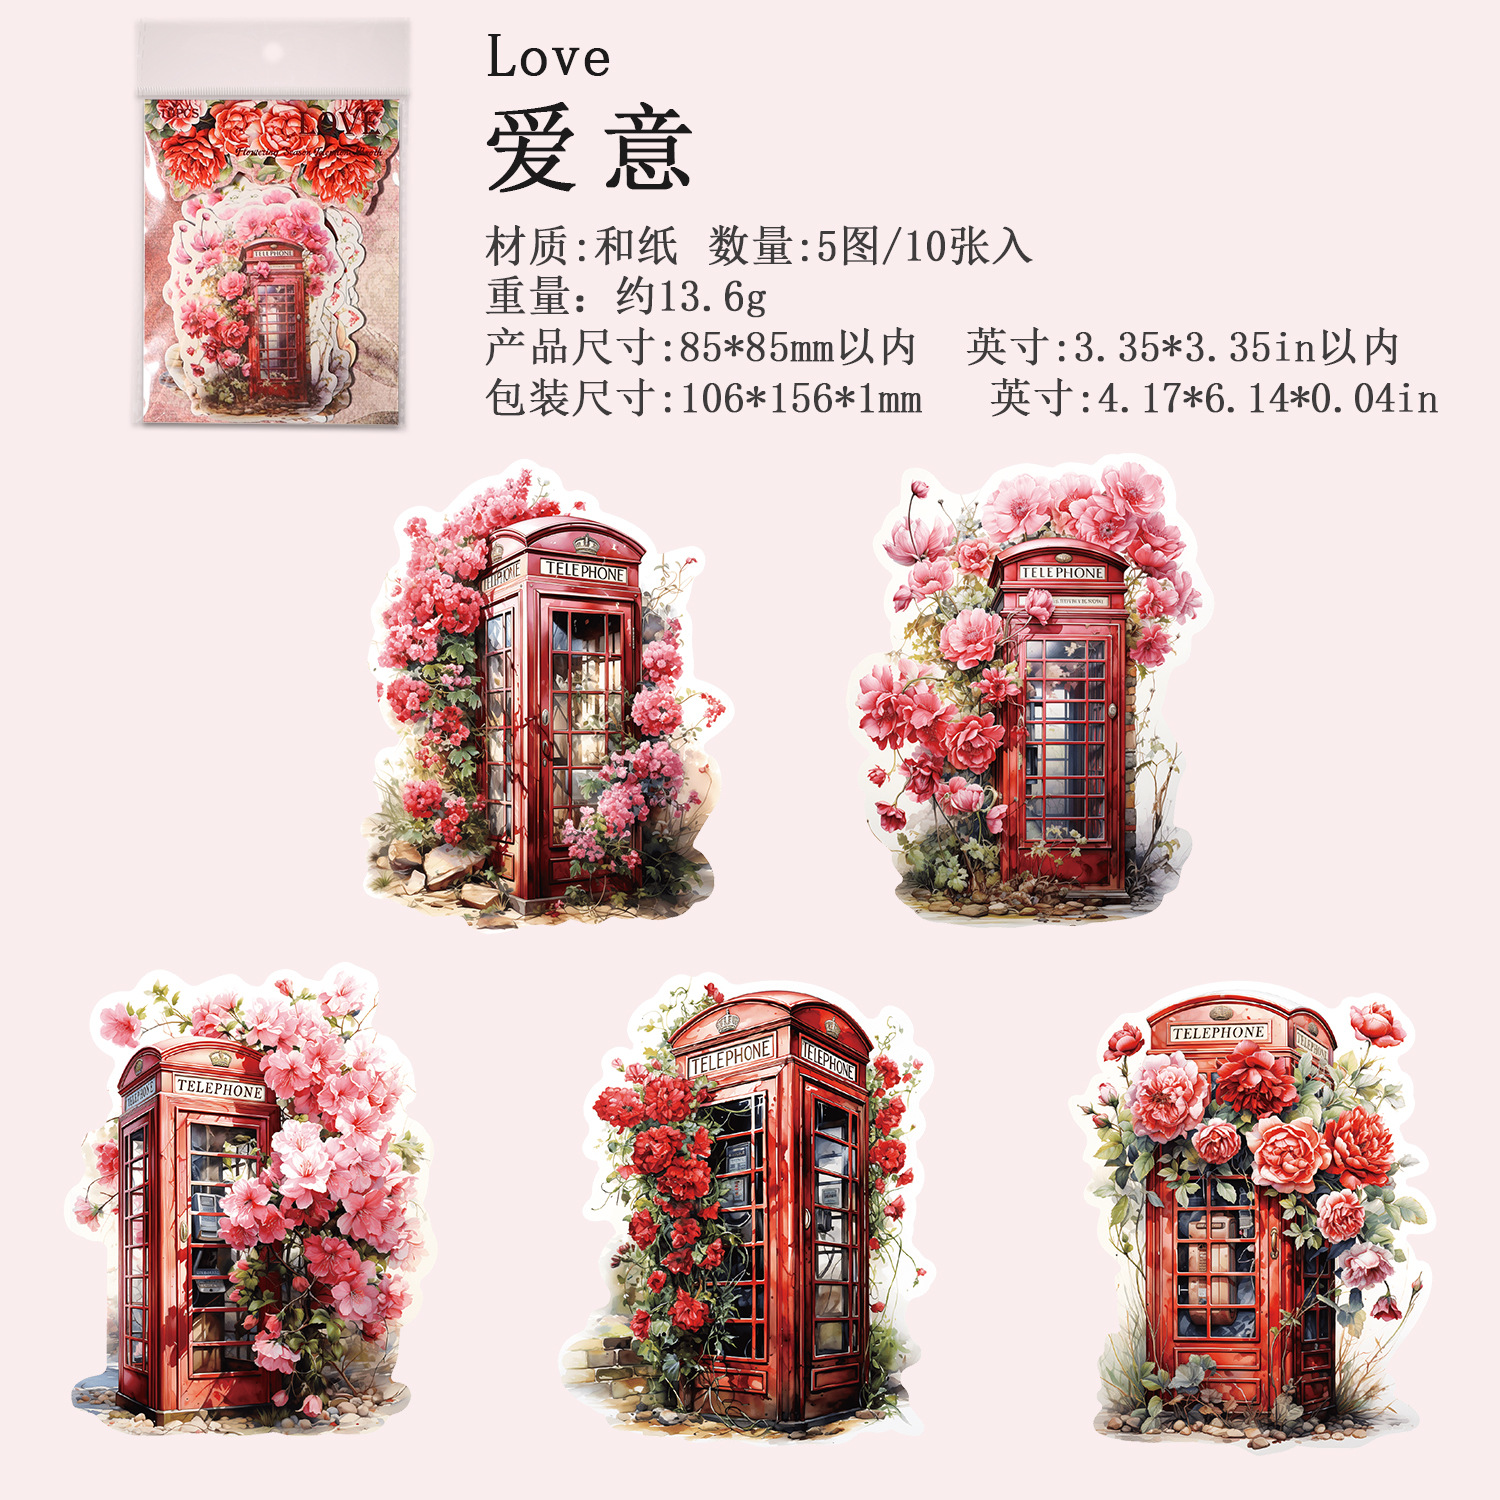 10pcs/pack flower phone booth theme stickers for scrapbook decoration crafts junk journal-JournalTale